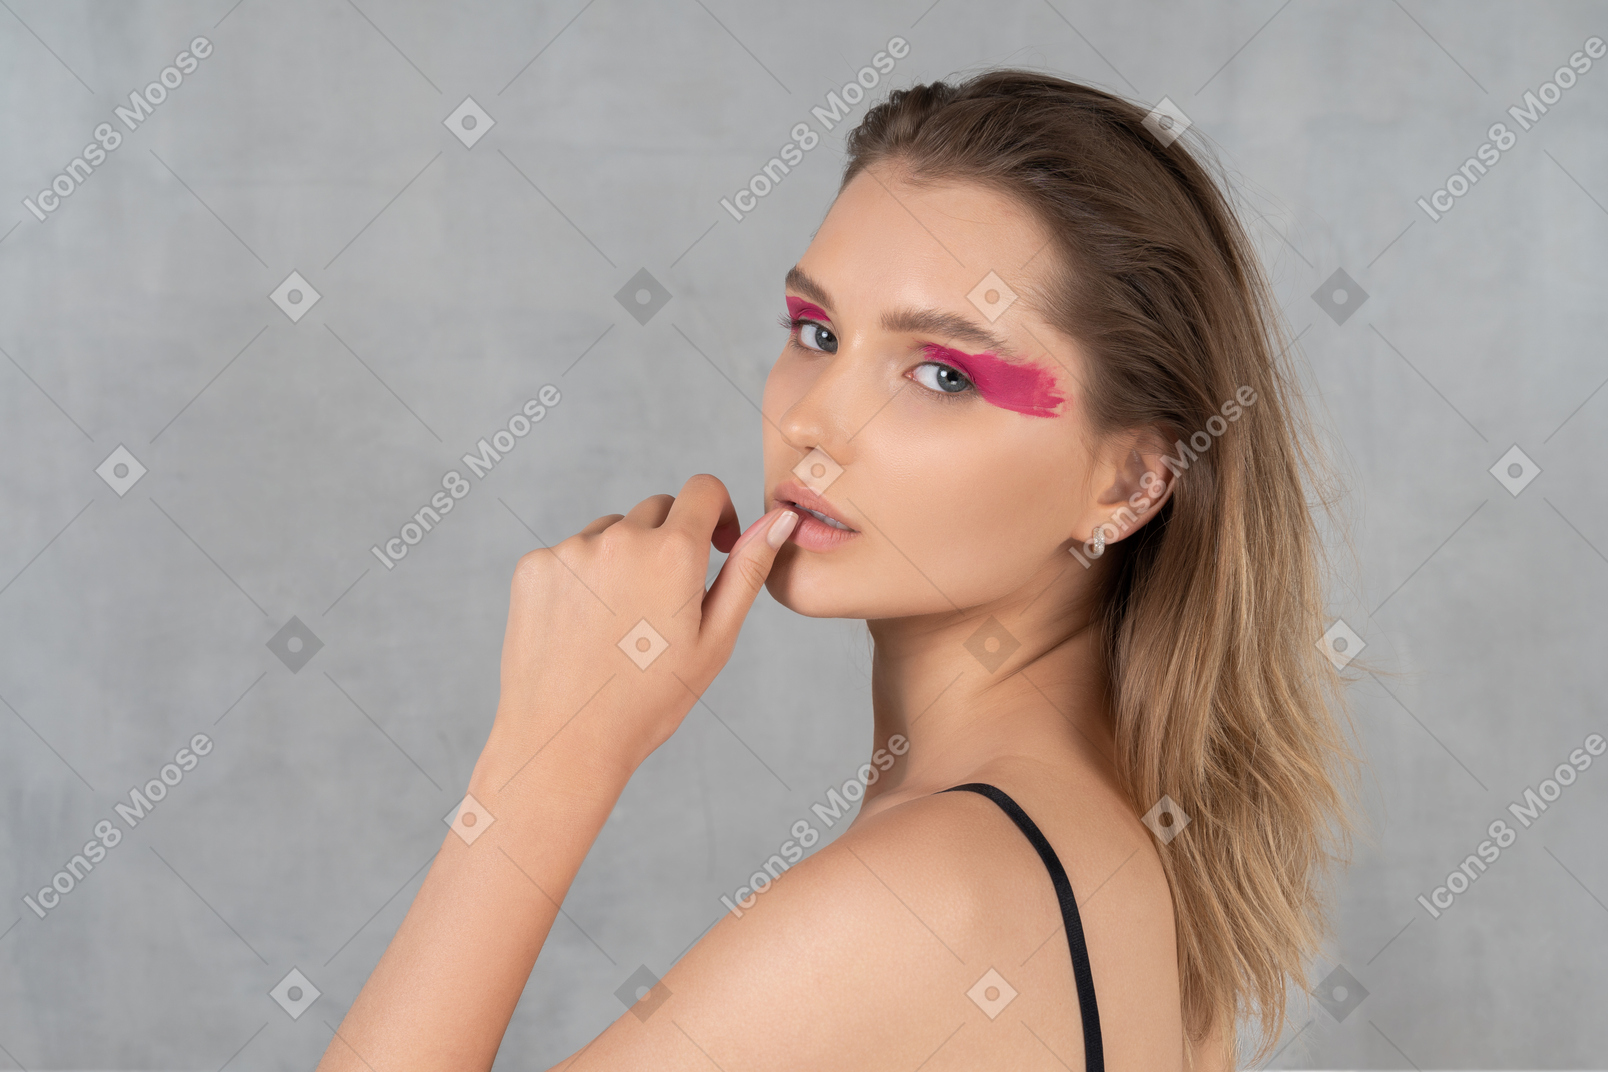 Attractive young woman with bold eye make-up holding thumb to lips